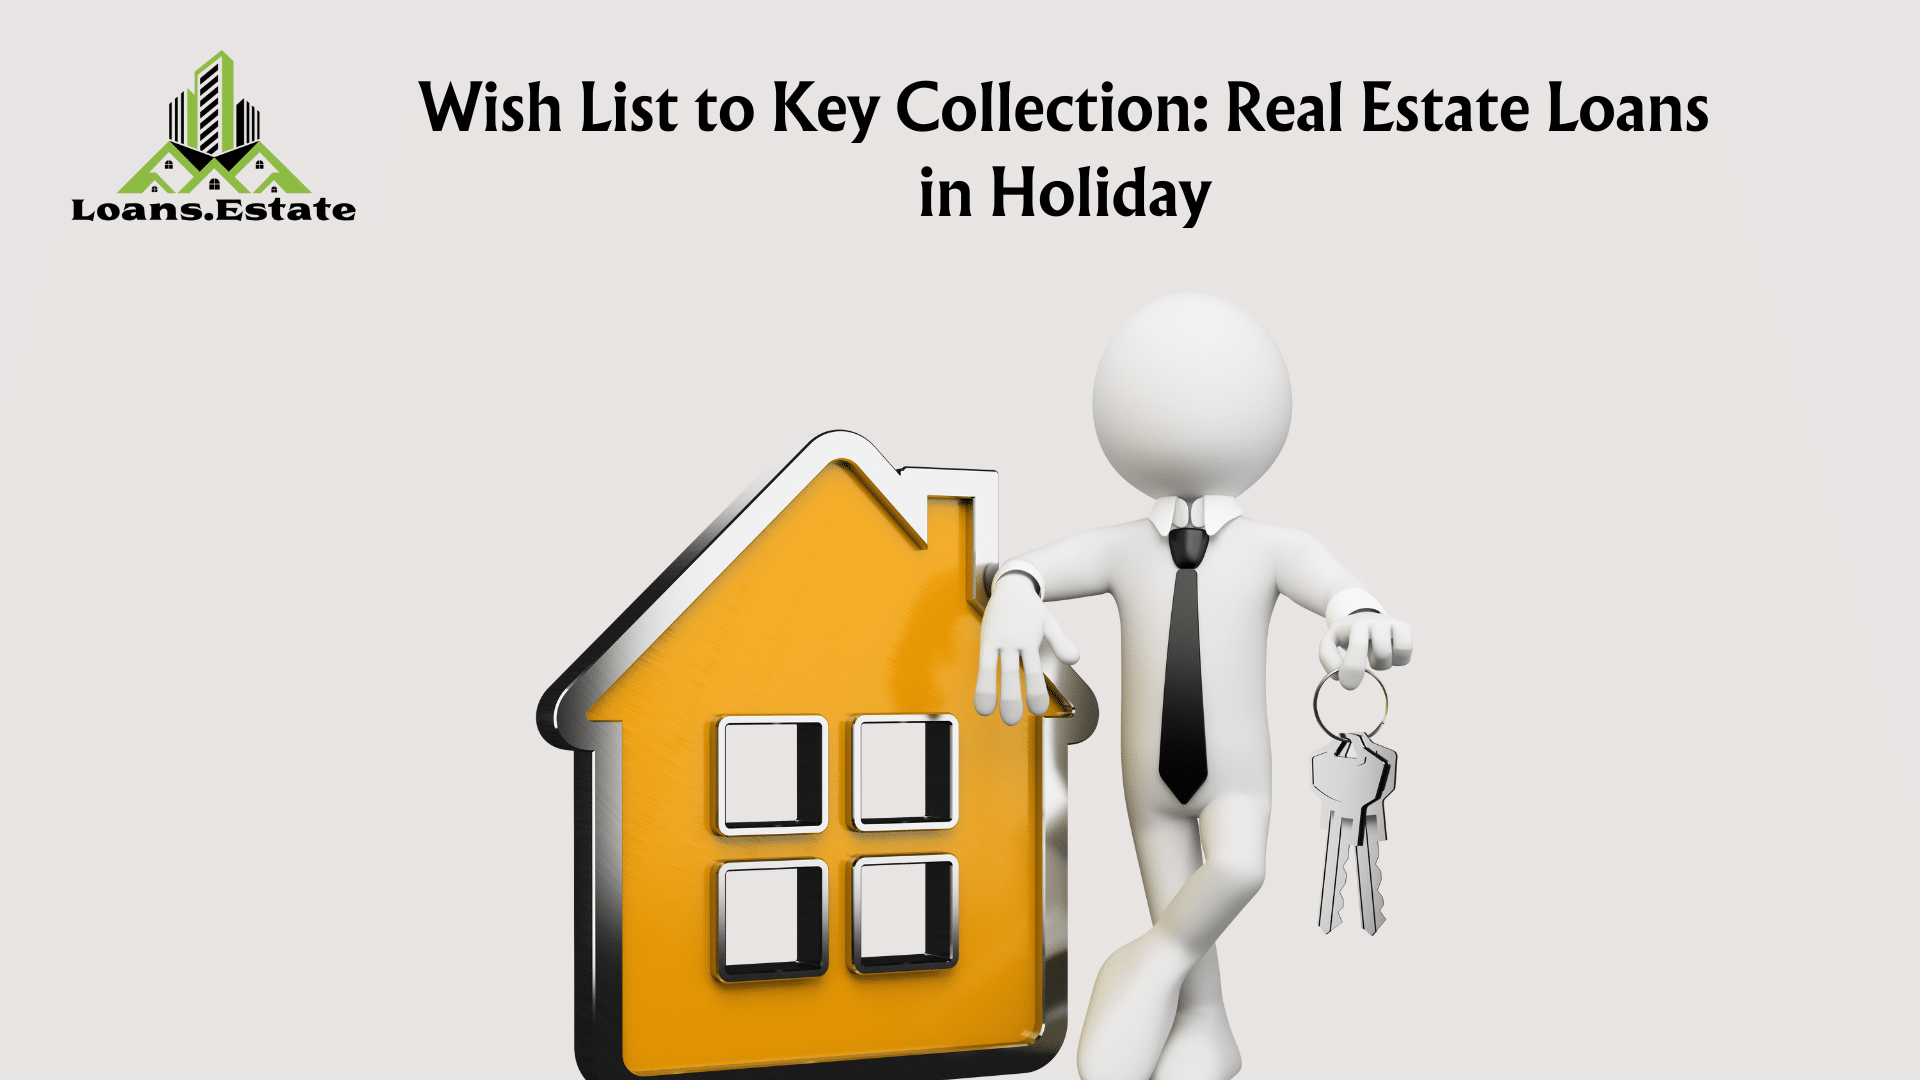 Wish List to Key Collection: Real Estate Loans in Holiday